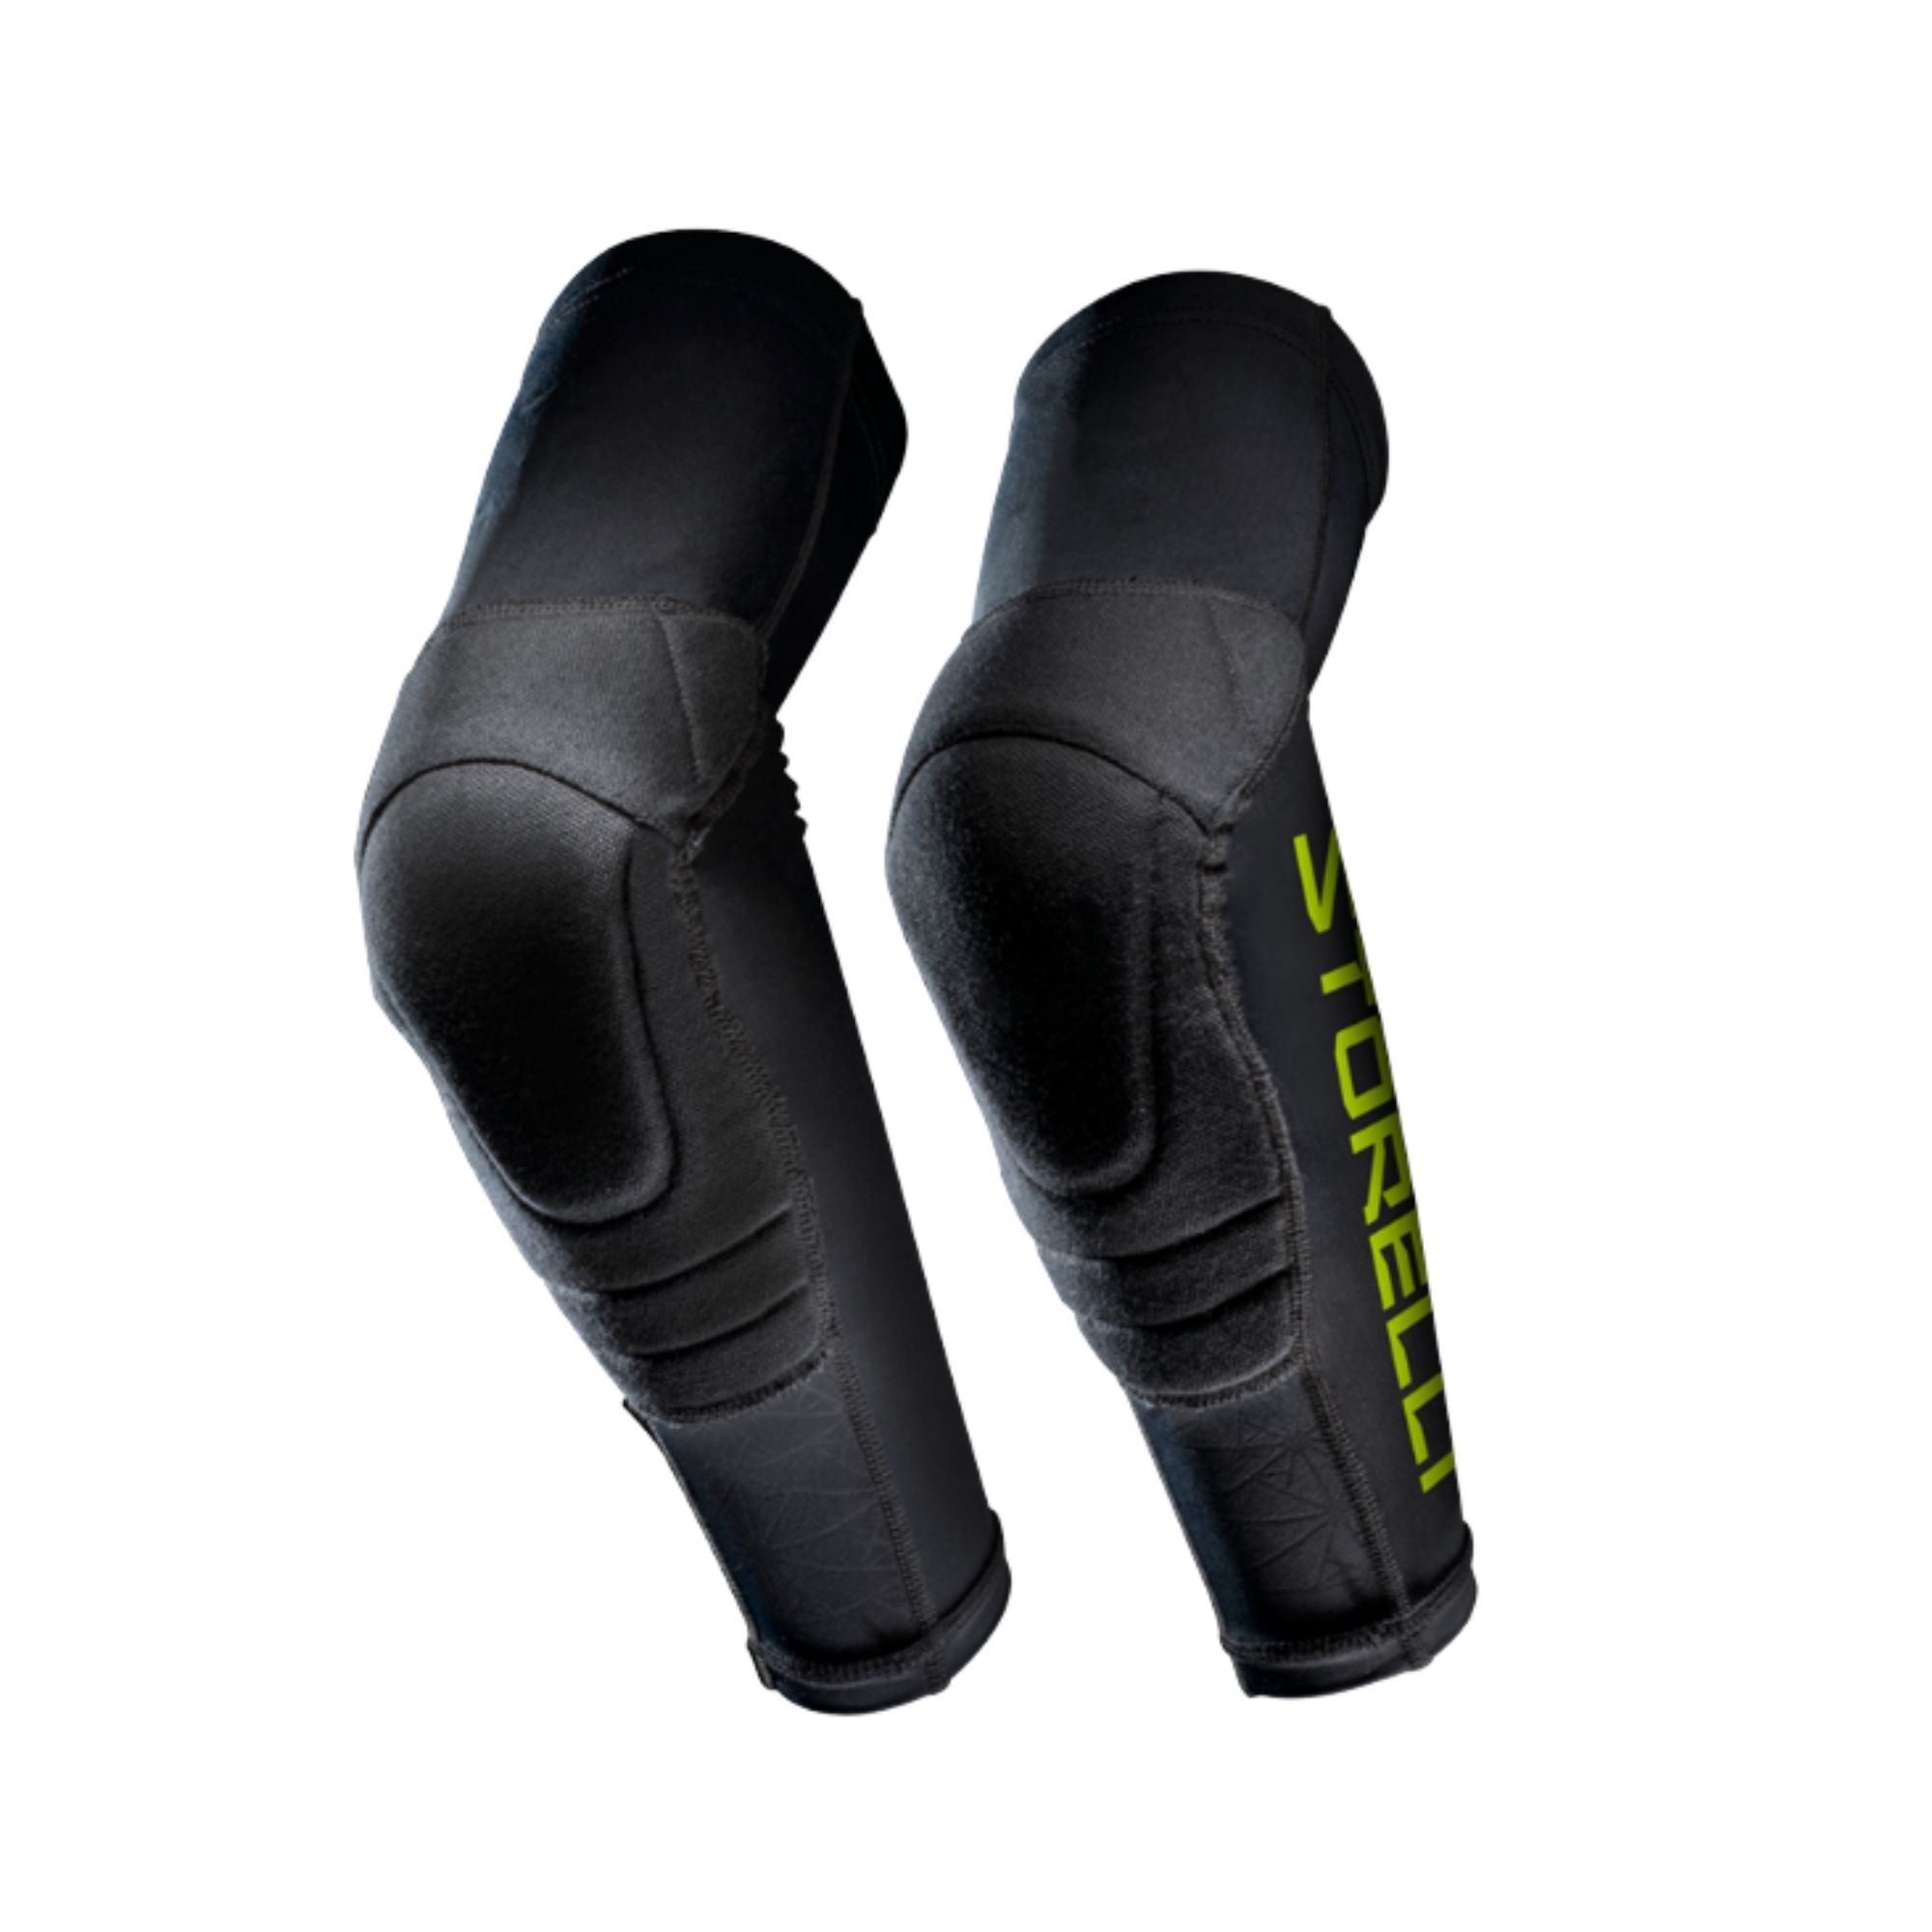 Elbow Guards by Storelli - ITASPORT